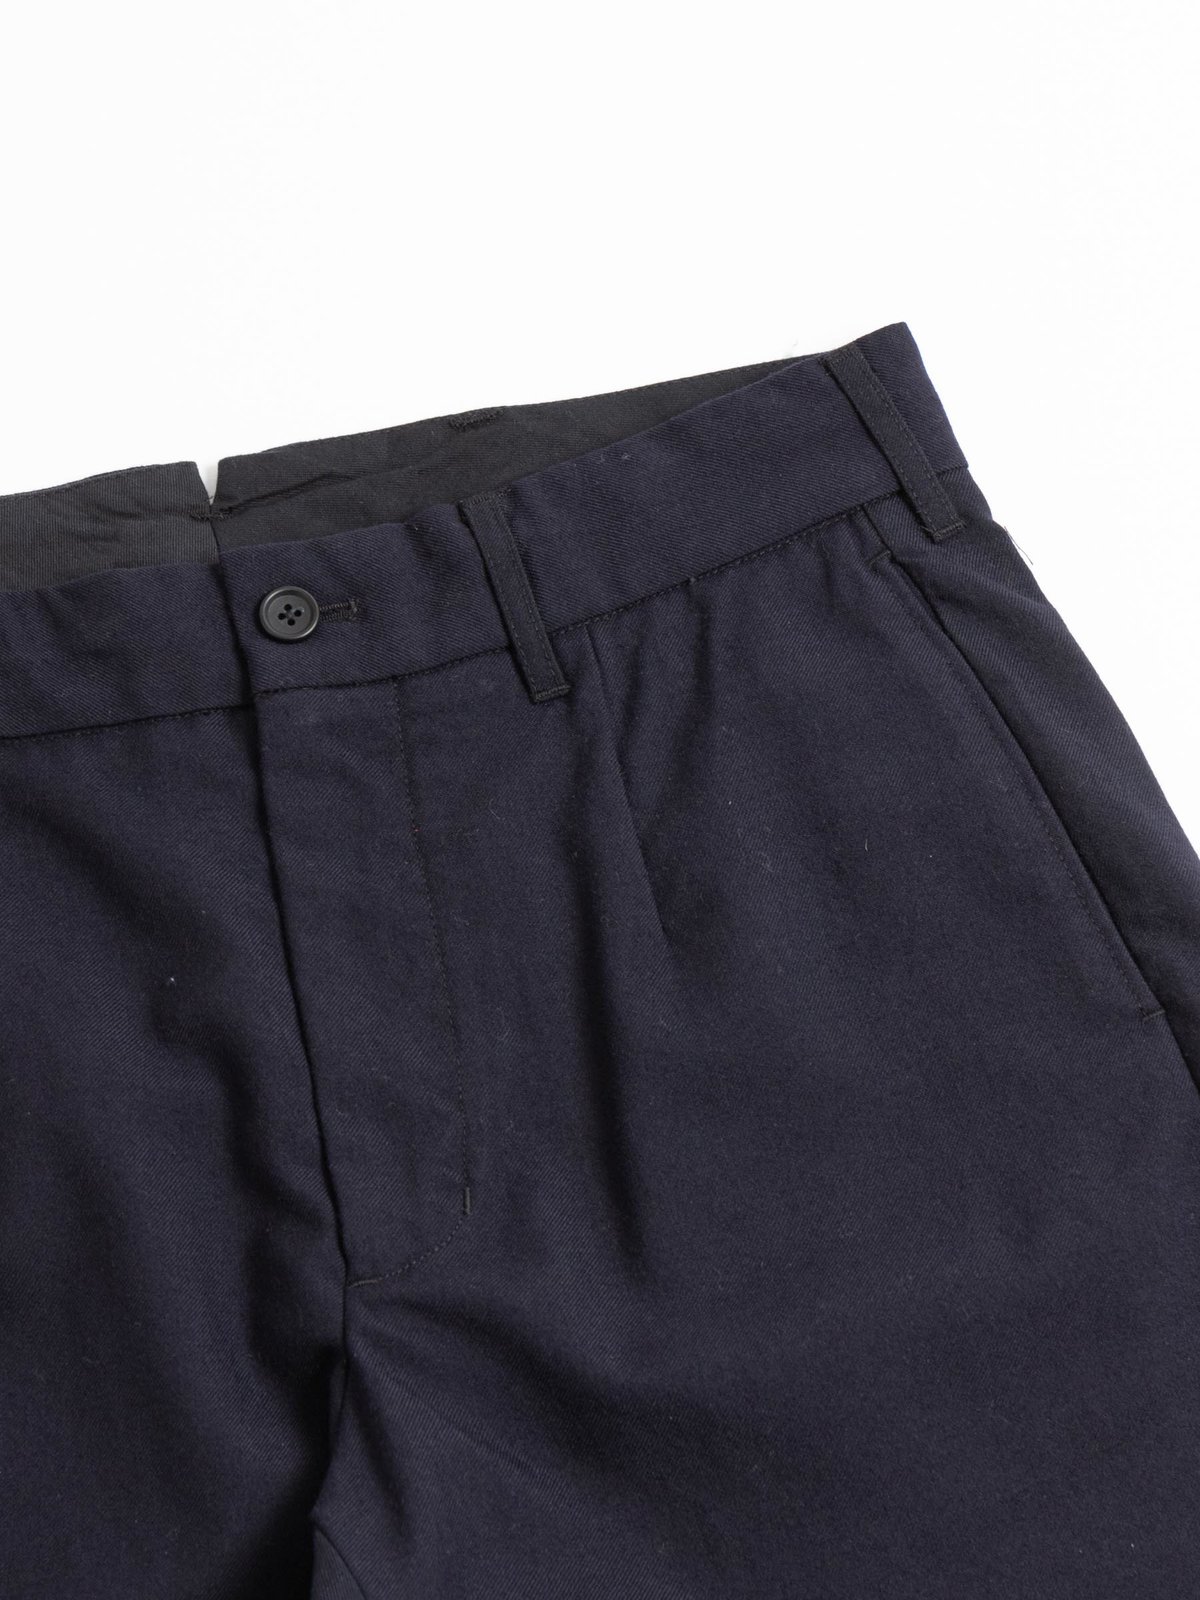 ANDOVER PANT DARK NAVY UNIFORM SERGE by Engineered Garments – The ...